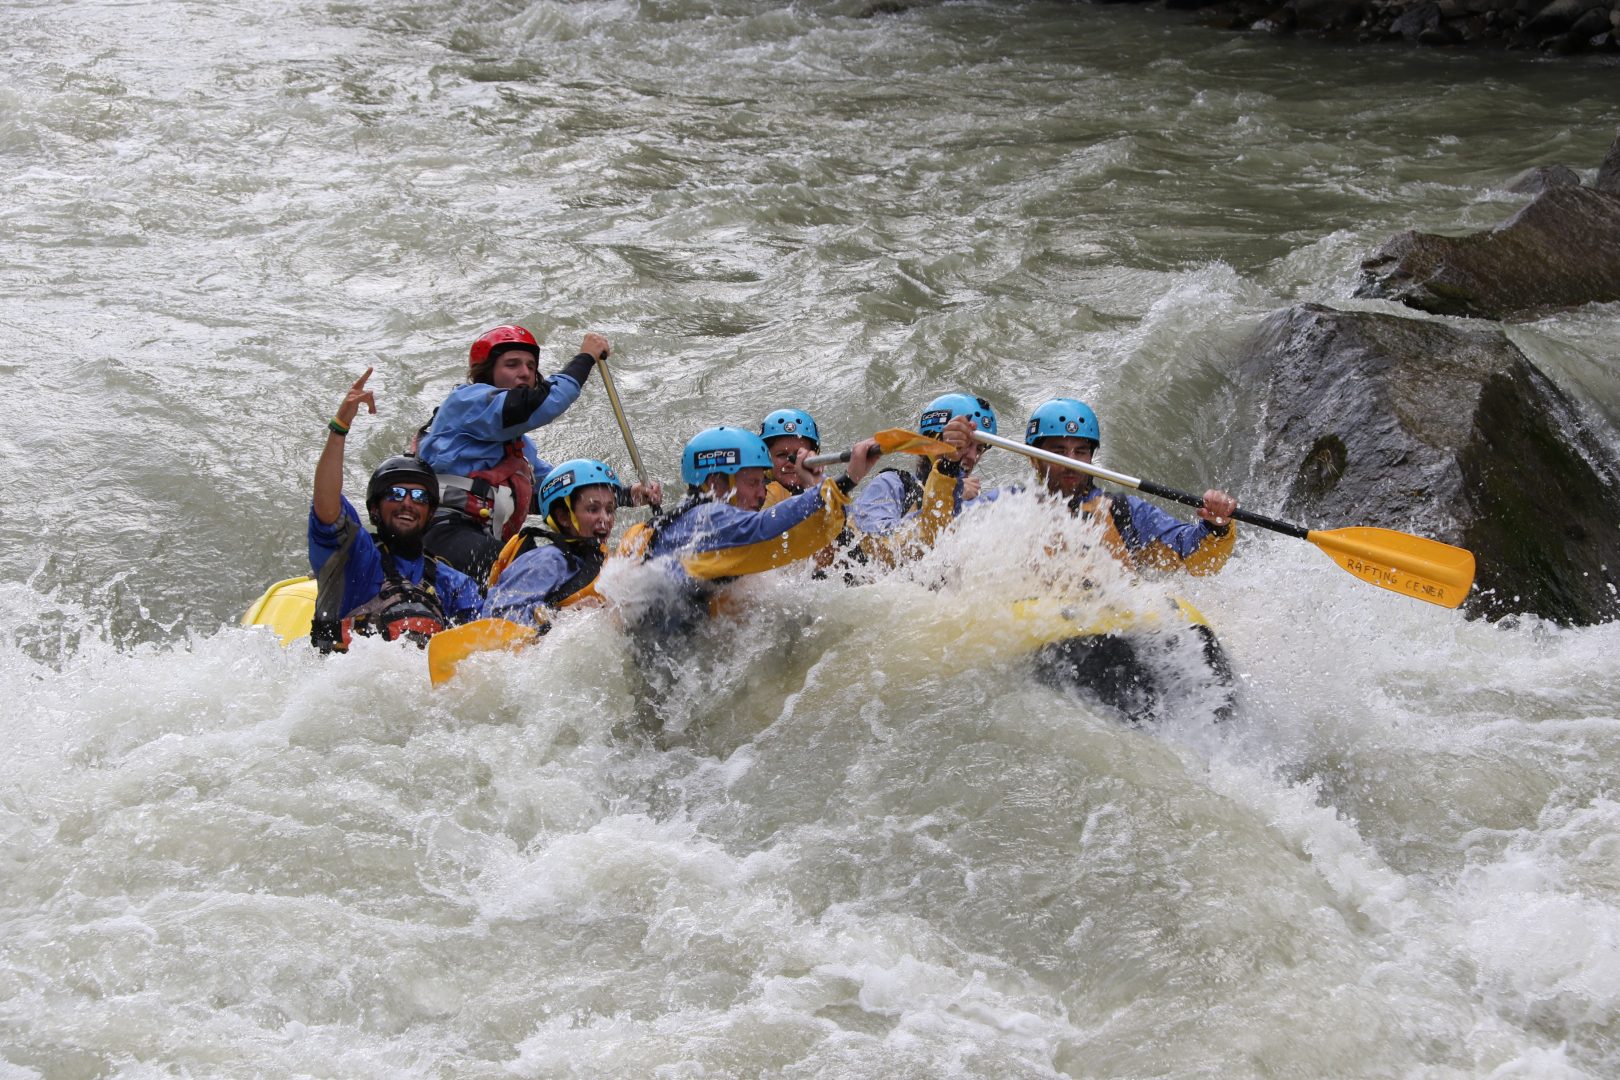 Rough waters while rafting the Noce